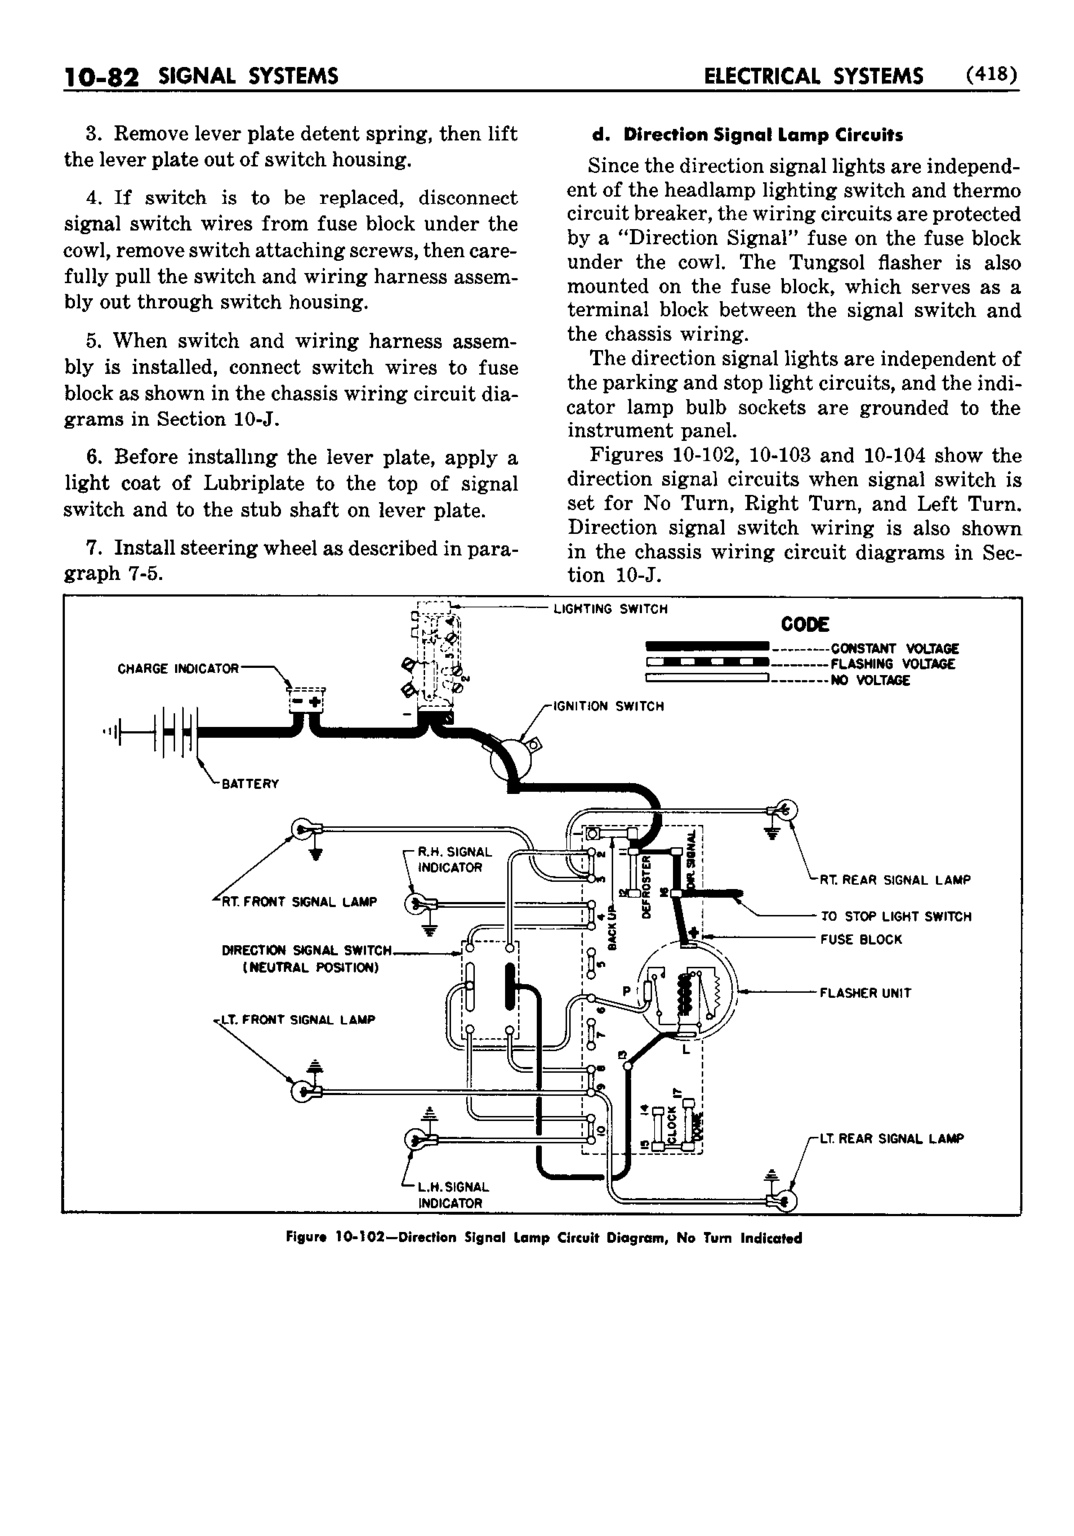 n_11 1952 Buick Shop Manual - Electrical Systems-082-082.jpg